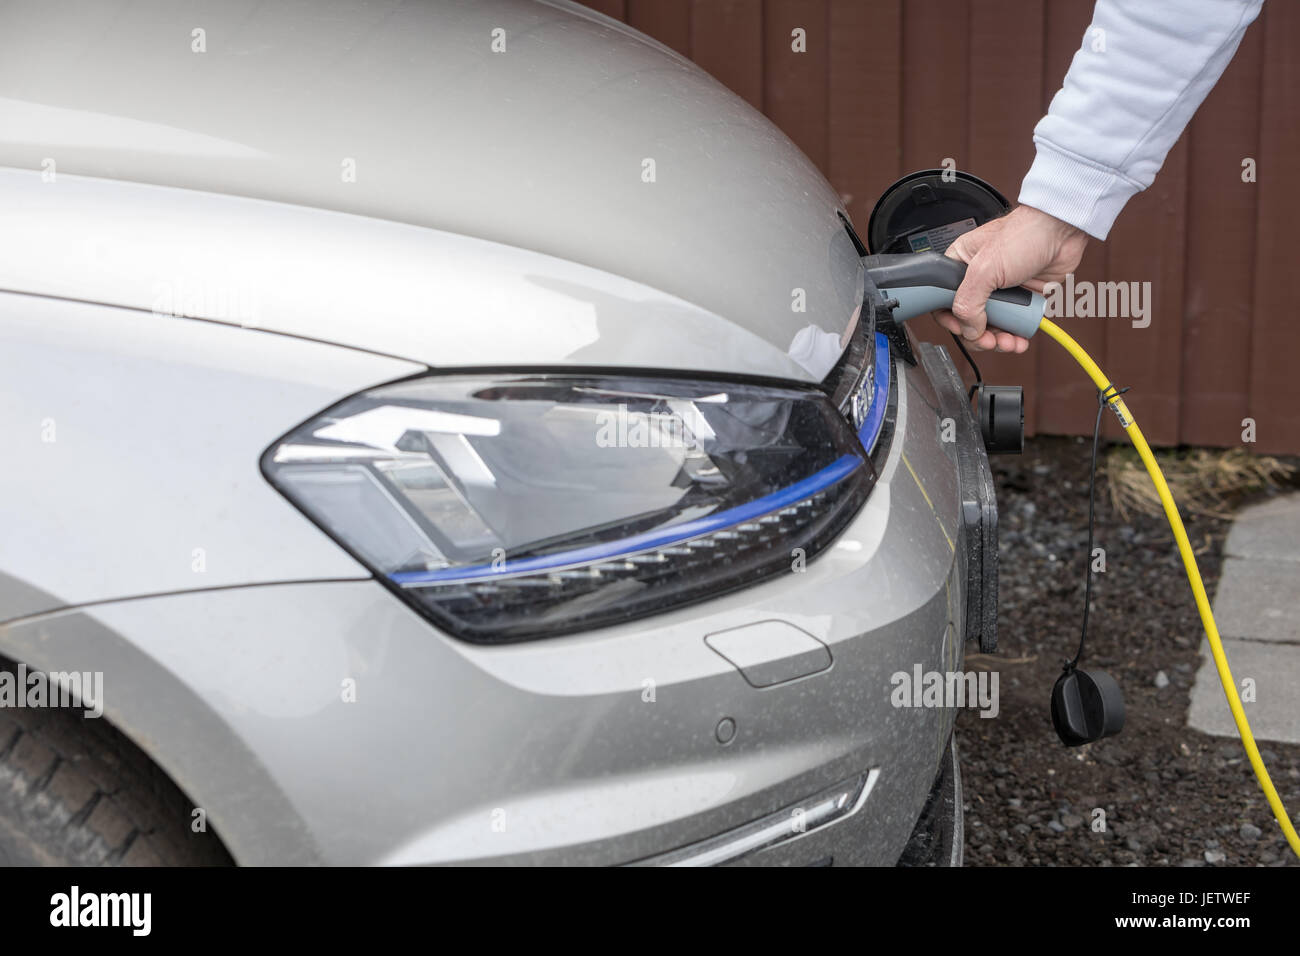 Vik, Iceland - Marsh 29, 2017: Charging An Electric Car With The Power Cable Supply Plugged In Stock Photo